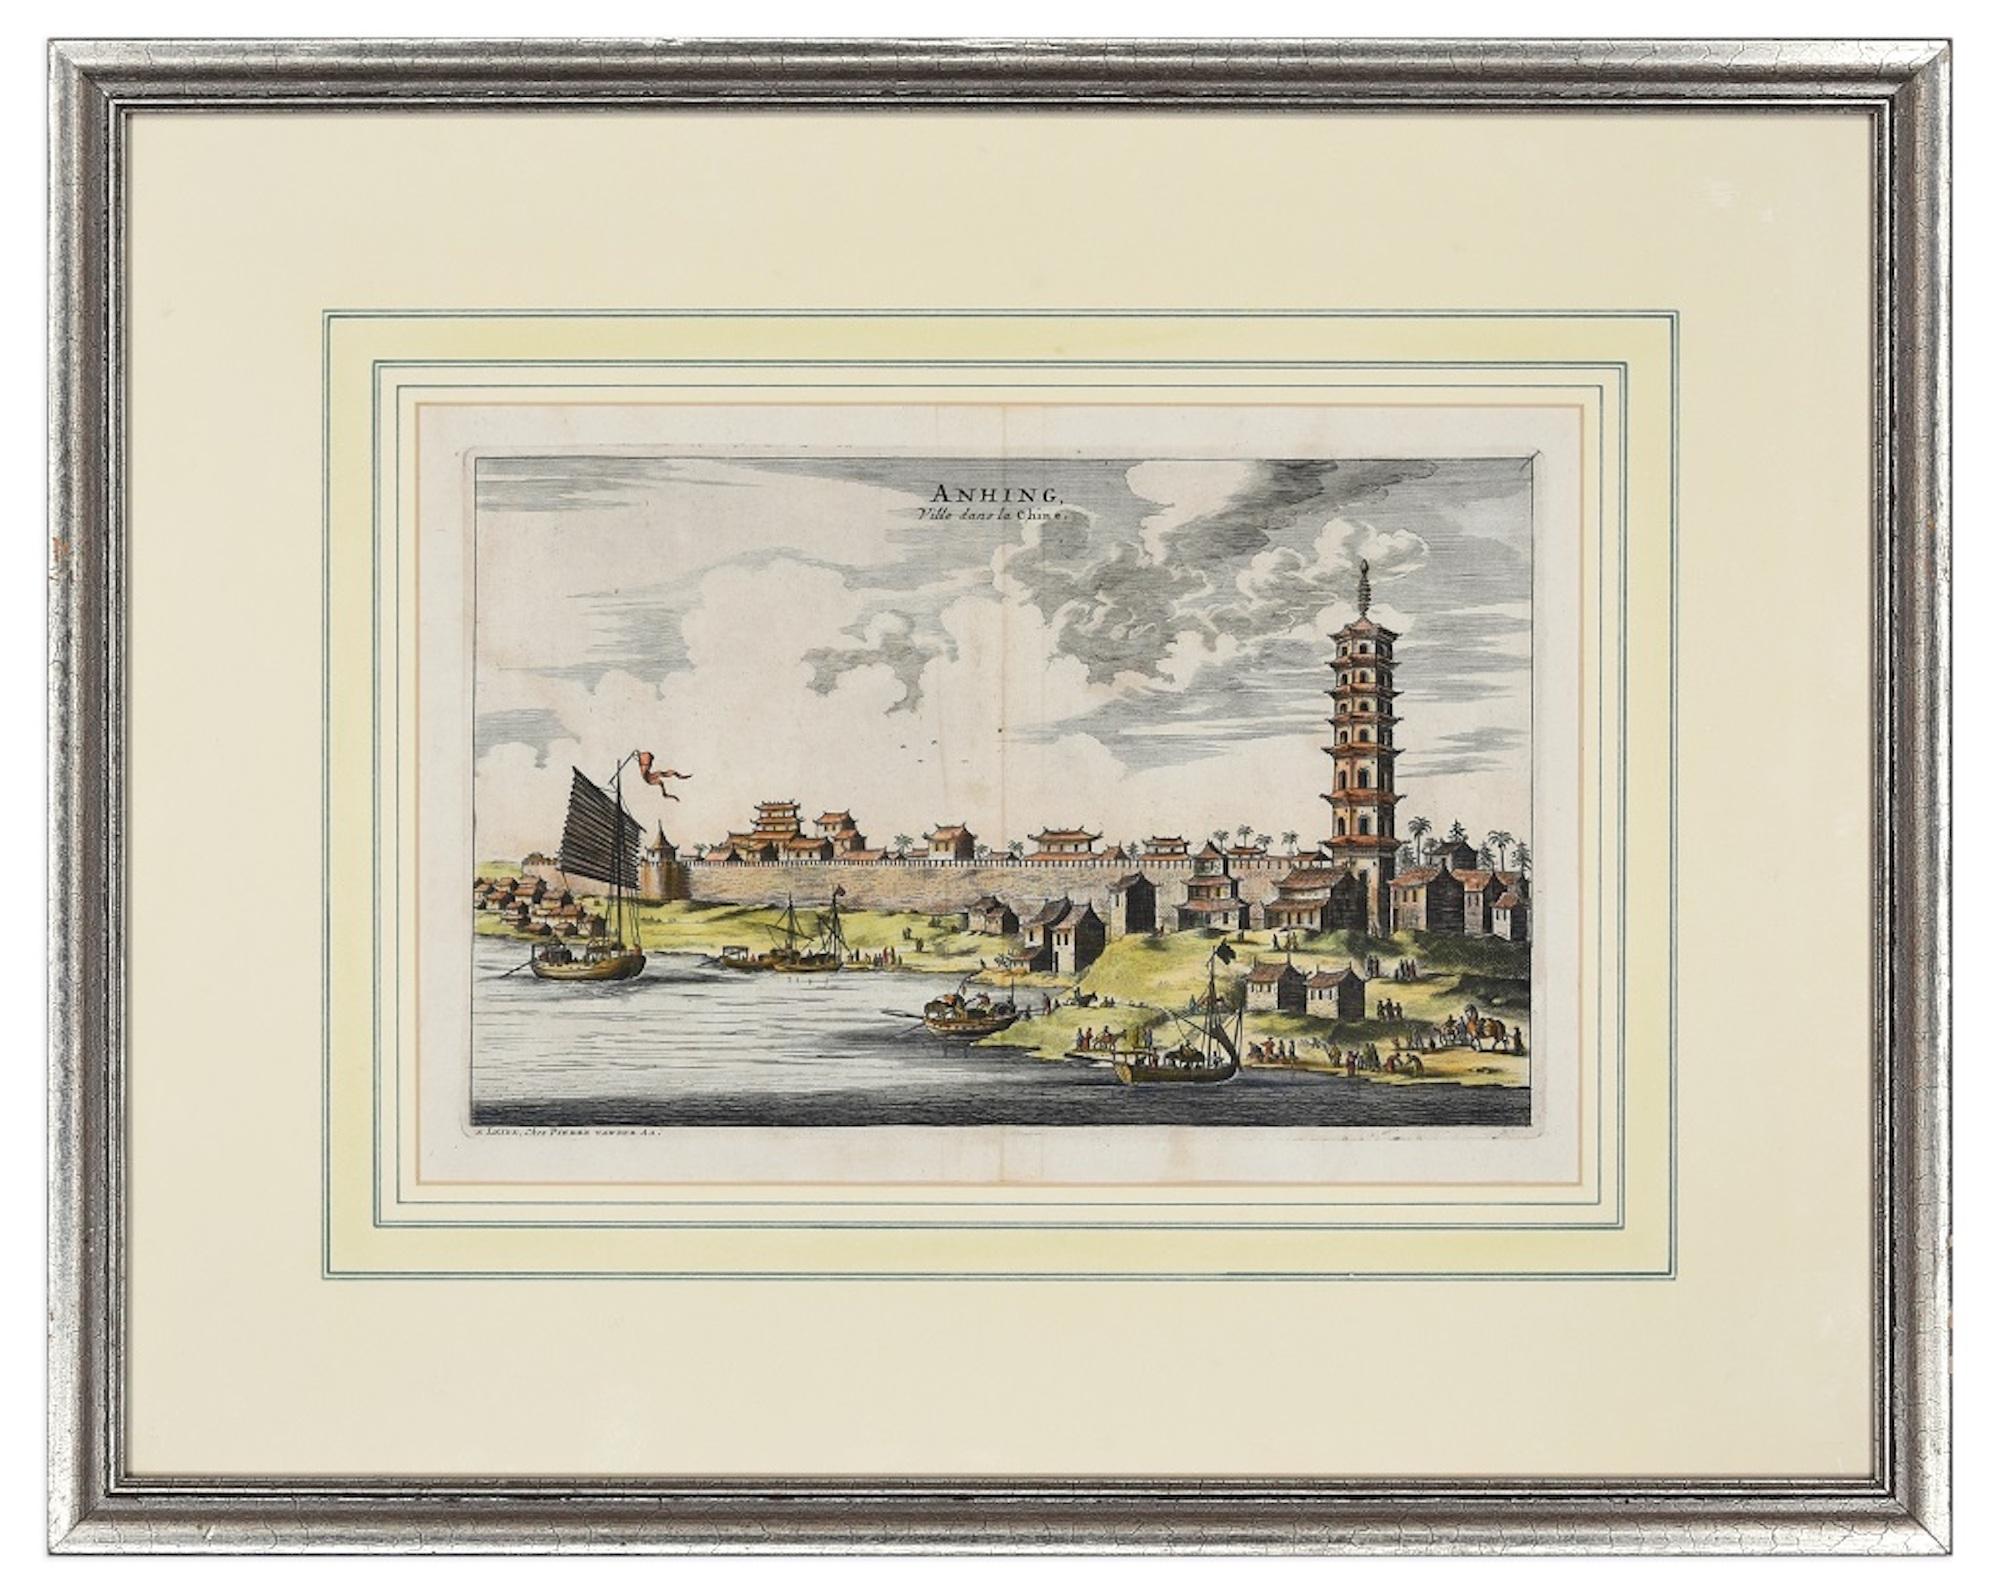 View Of Anning - Original Hand Watercolored Etching by A. Leide - Print by Pieter Van Der Aa